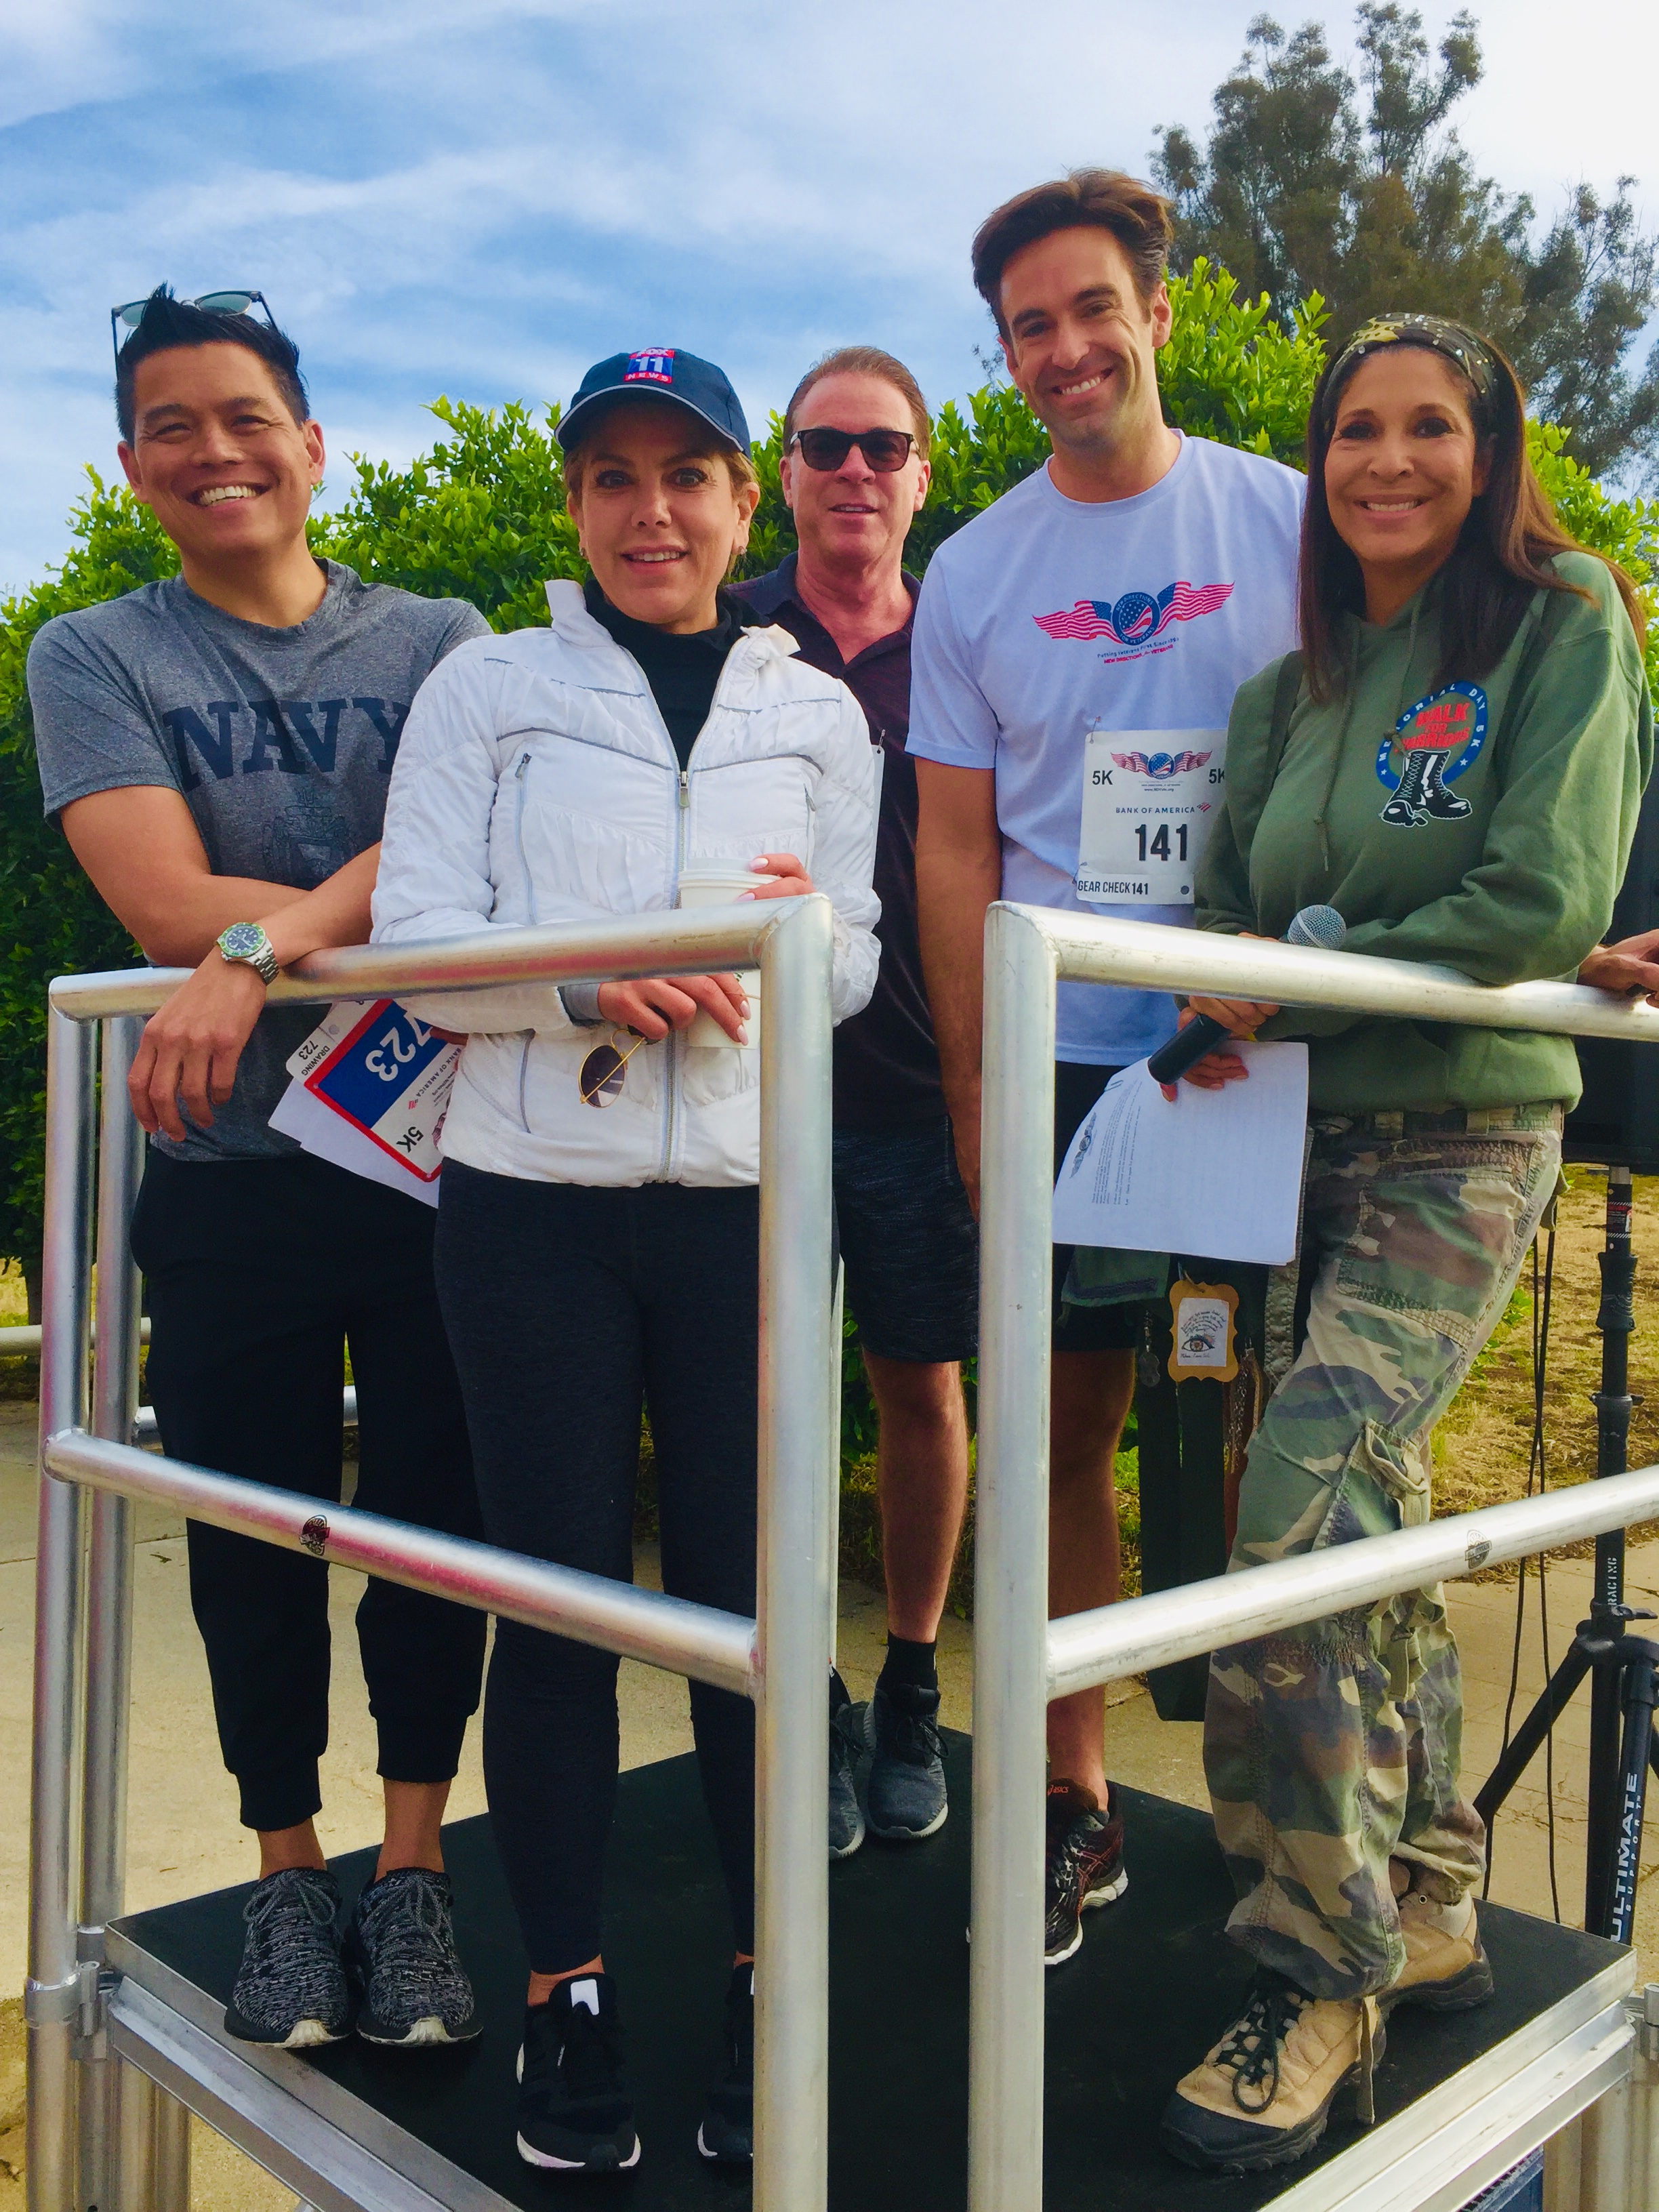 The Charity Fitness Tour marches to The 2019 New Directions for Veterans 5k!